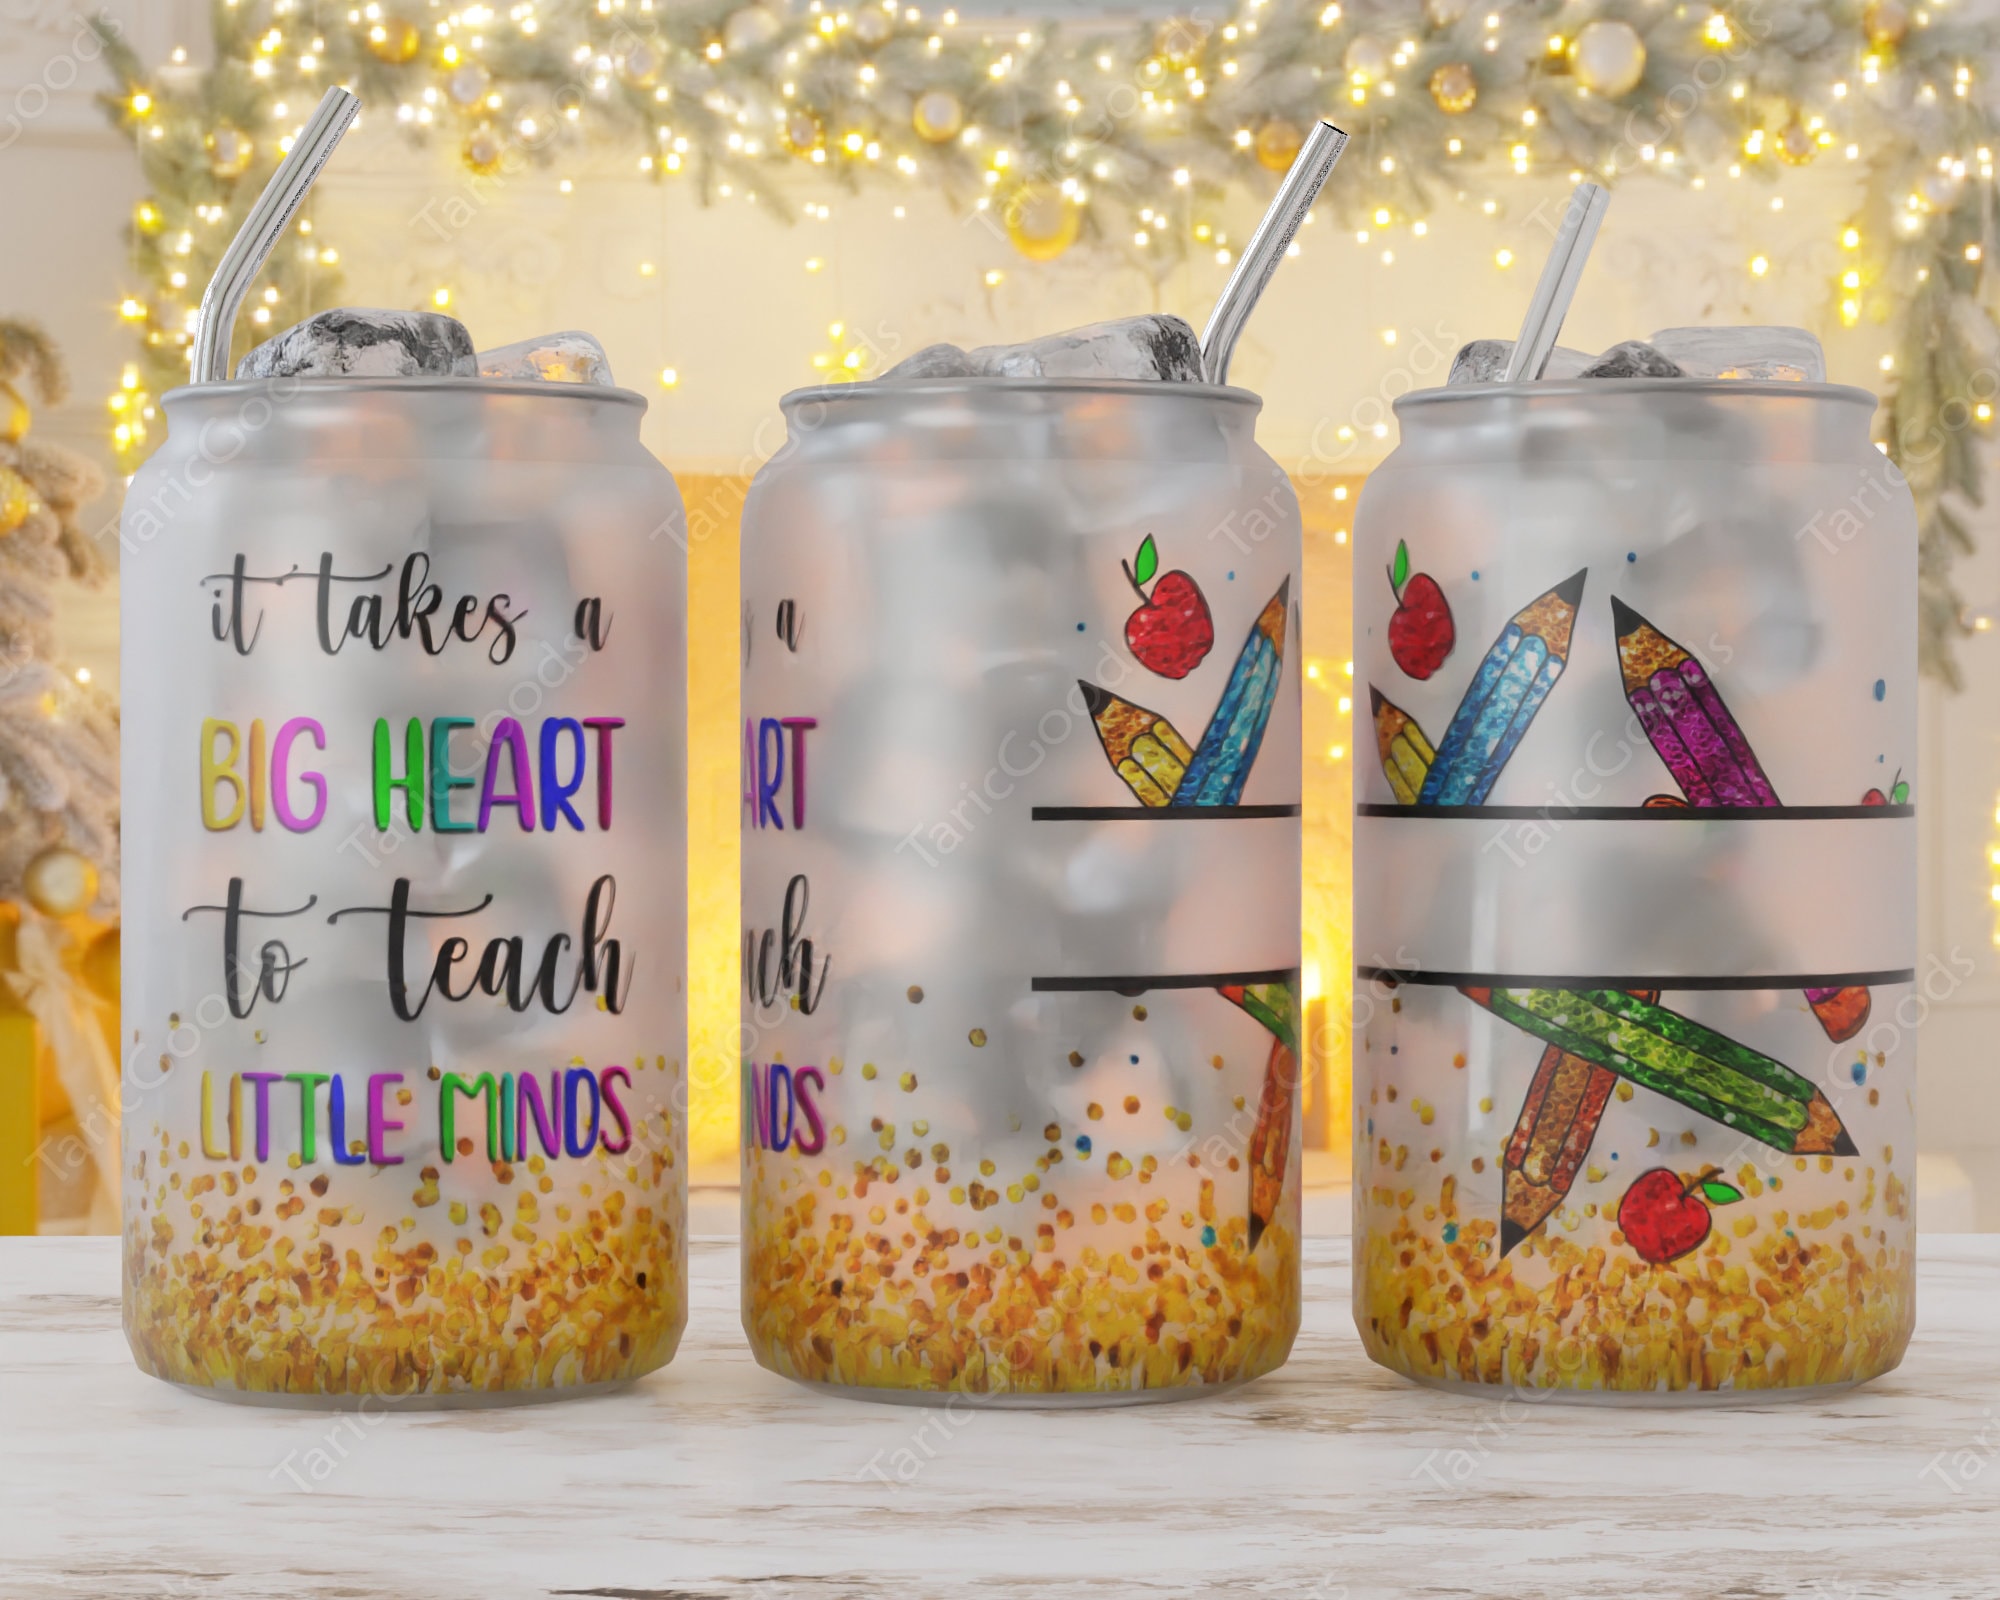 Best Teacher Ever - Beer Can Pint Glass - Cute Funny Teacher Gifts for -  bevvee